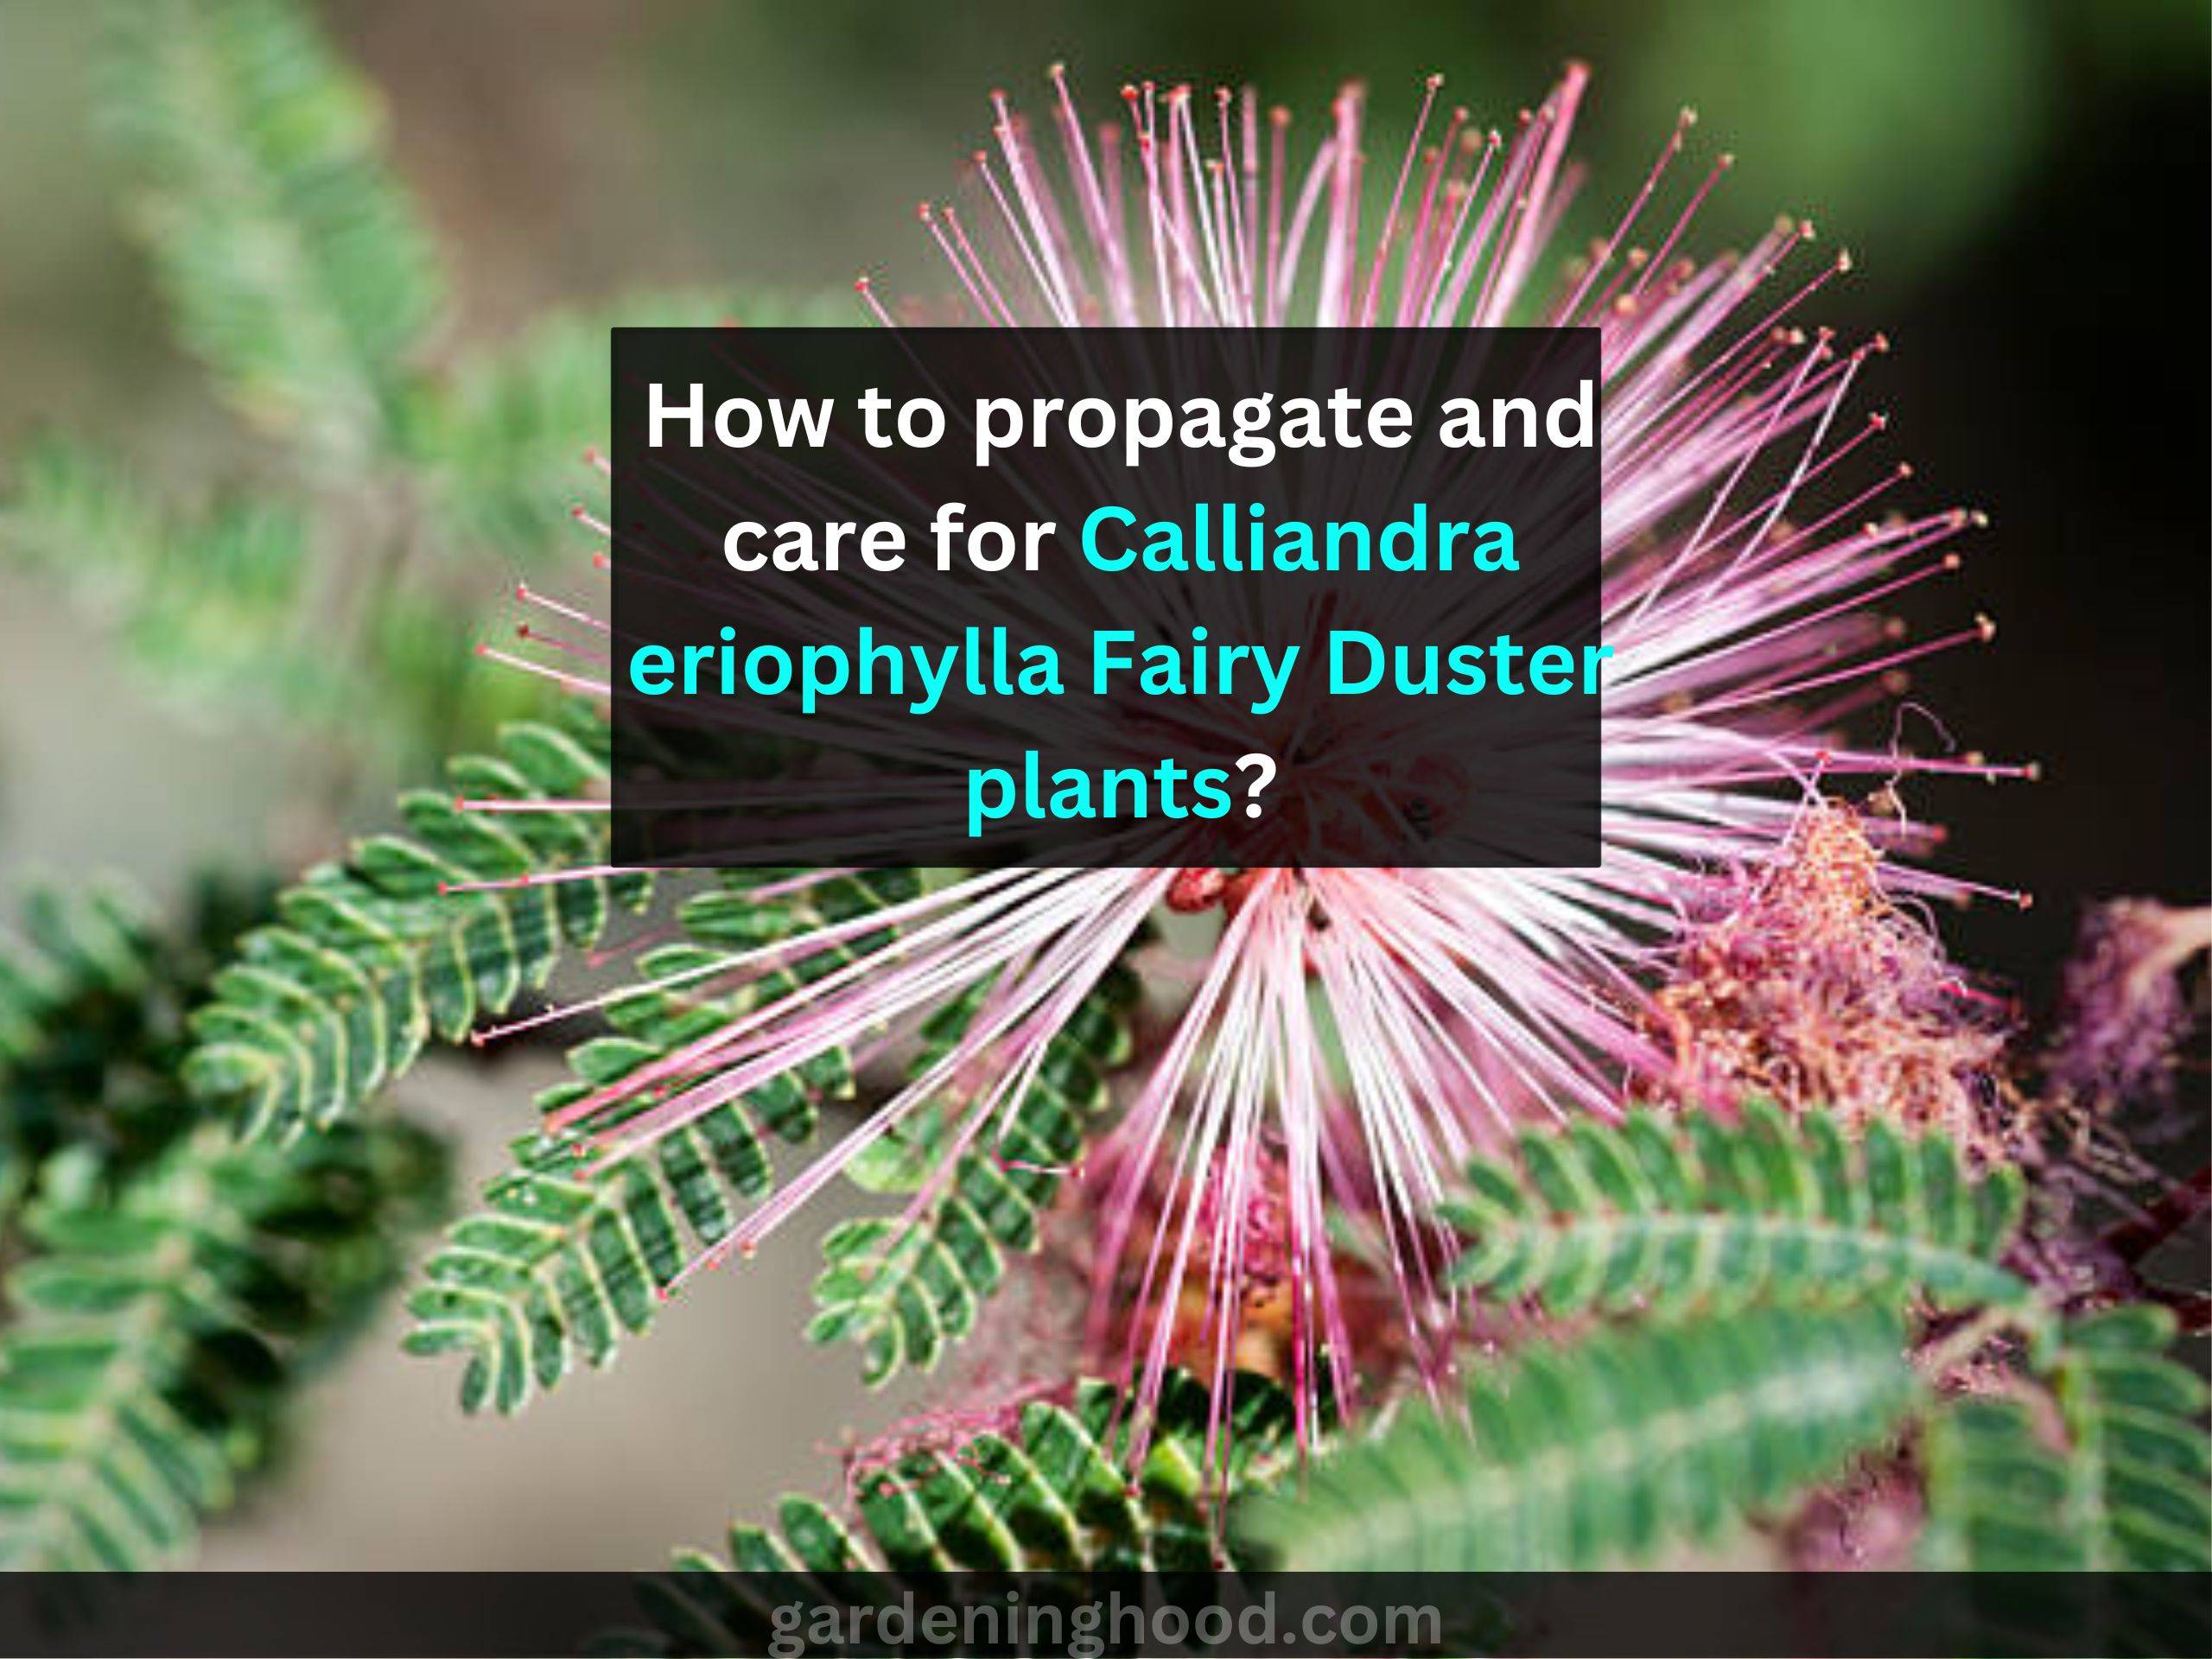 How to propagate and care for Calliandra eriophylla Fairy Duster plants?